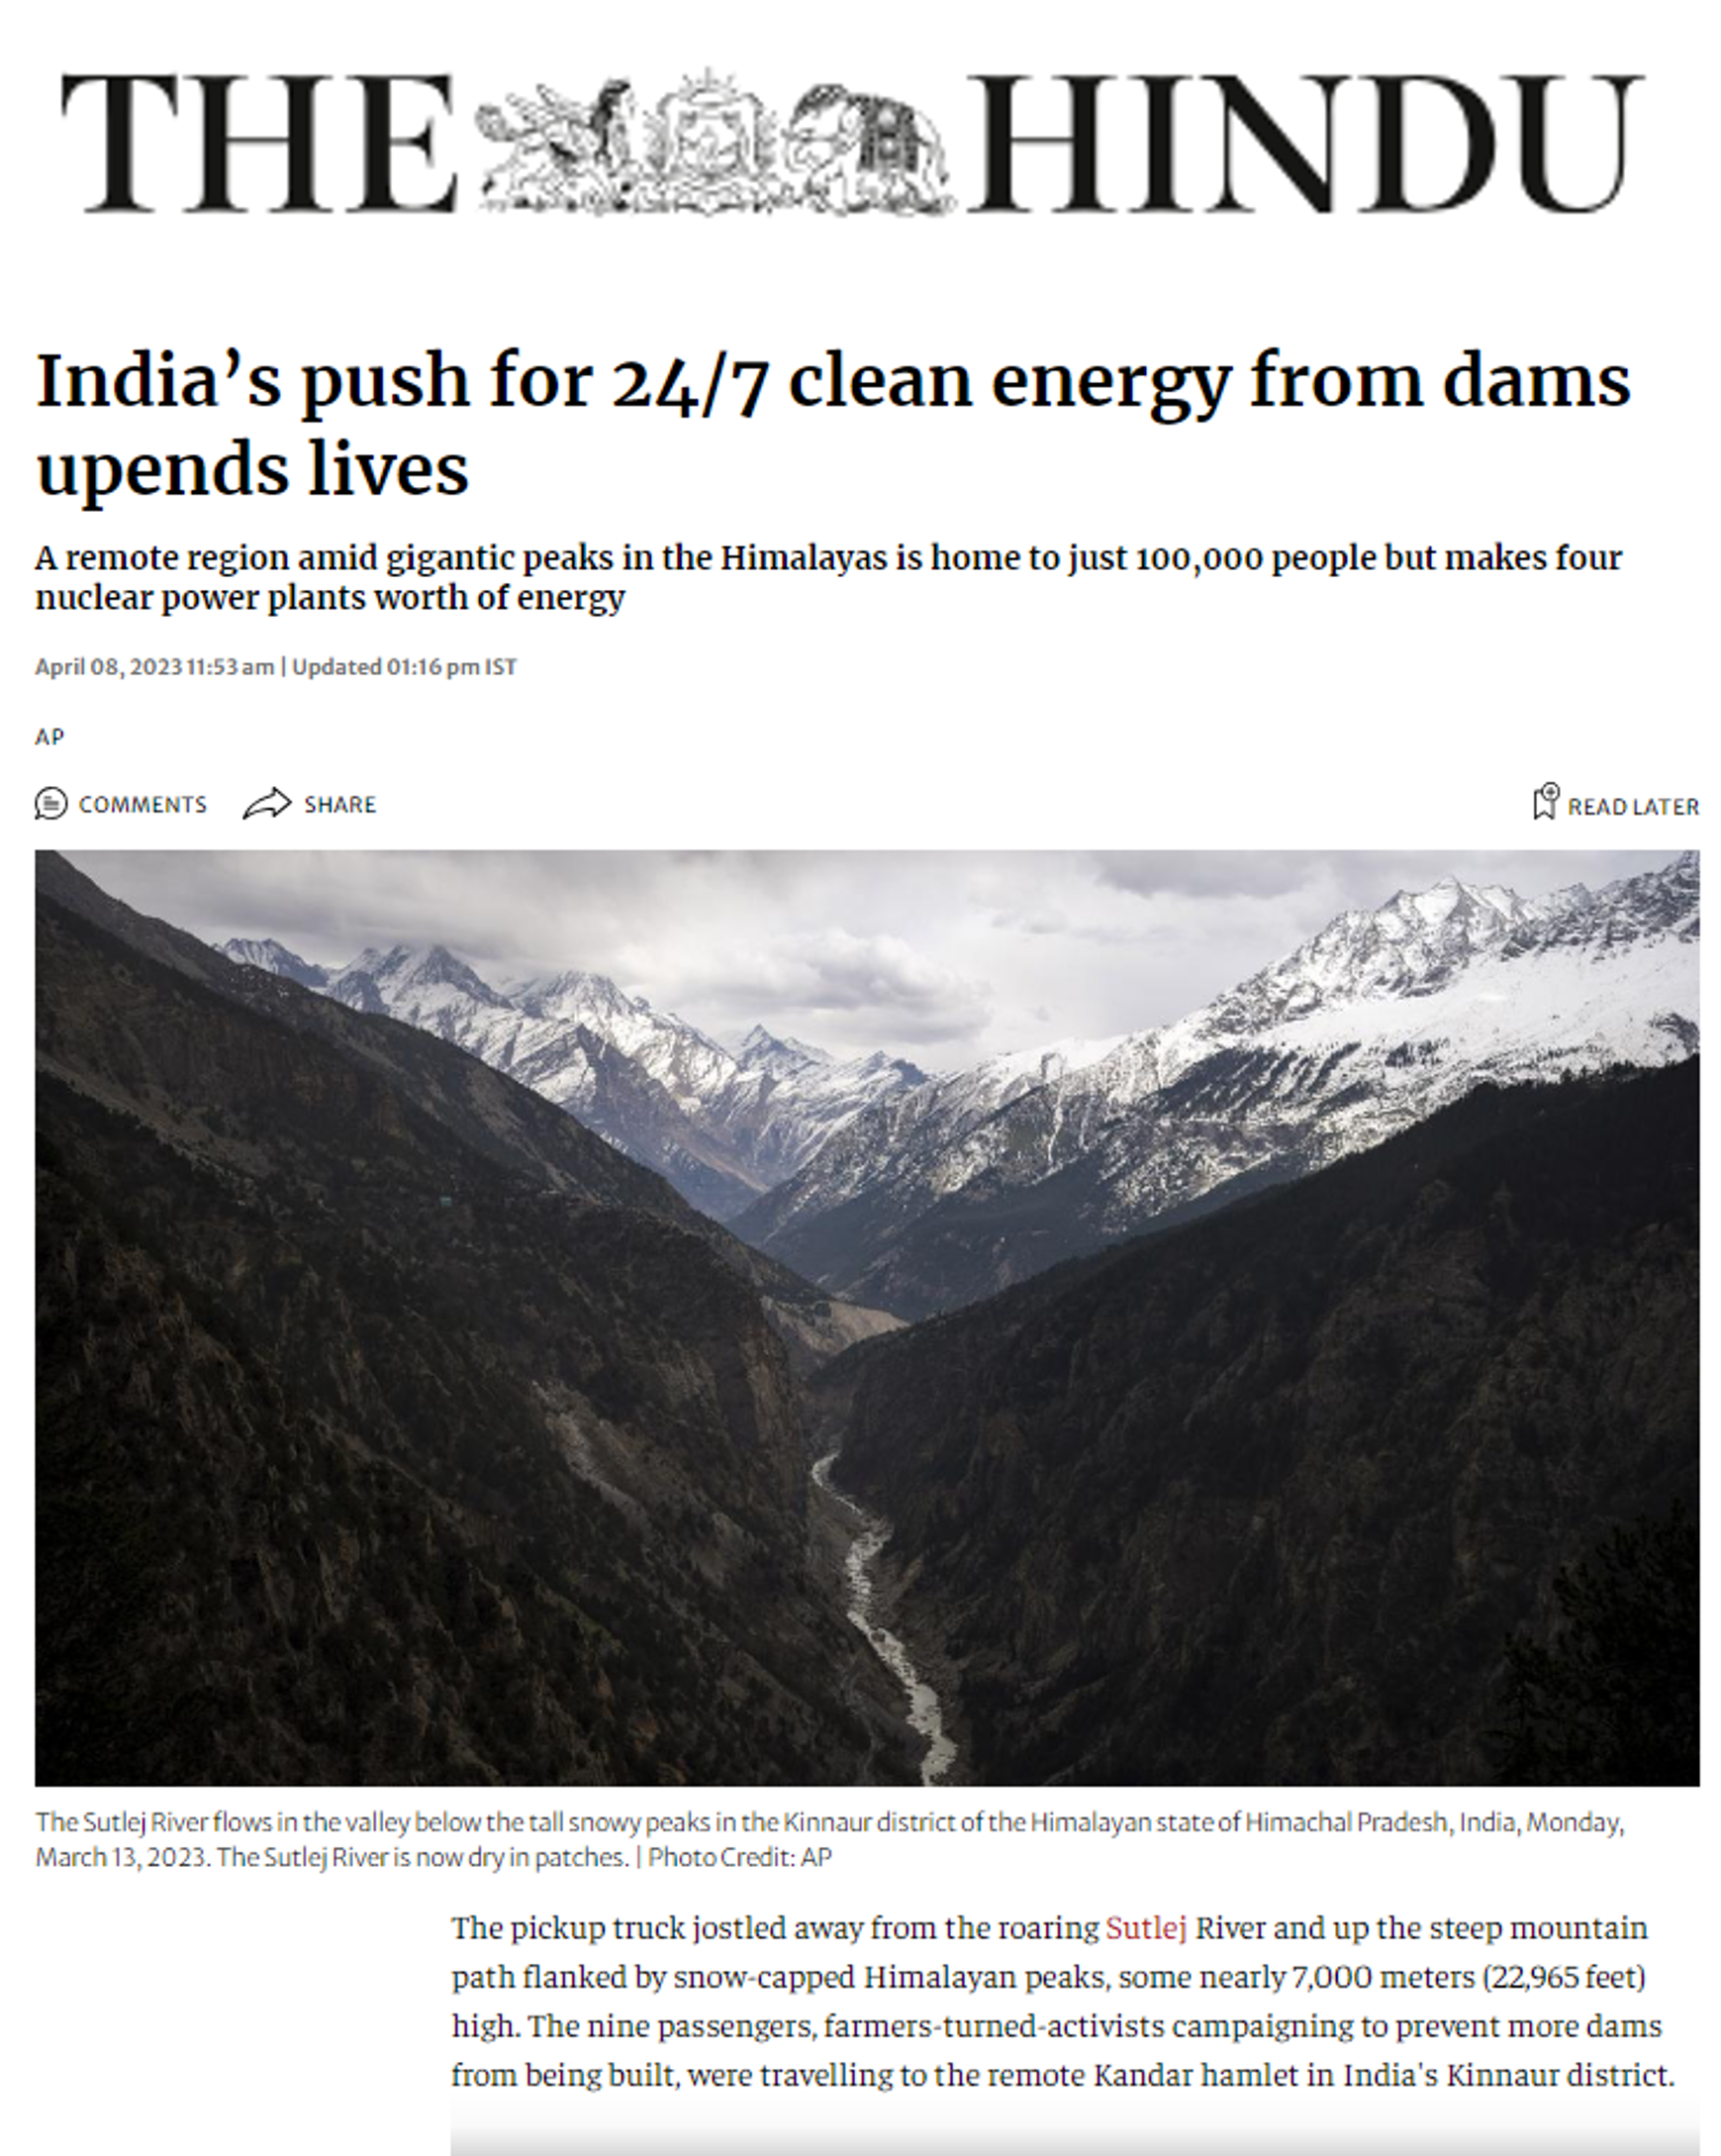 Dr Ammu Susanna Jacob quoted by The Hindu on the role of large dams in balancing the grid